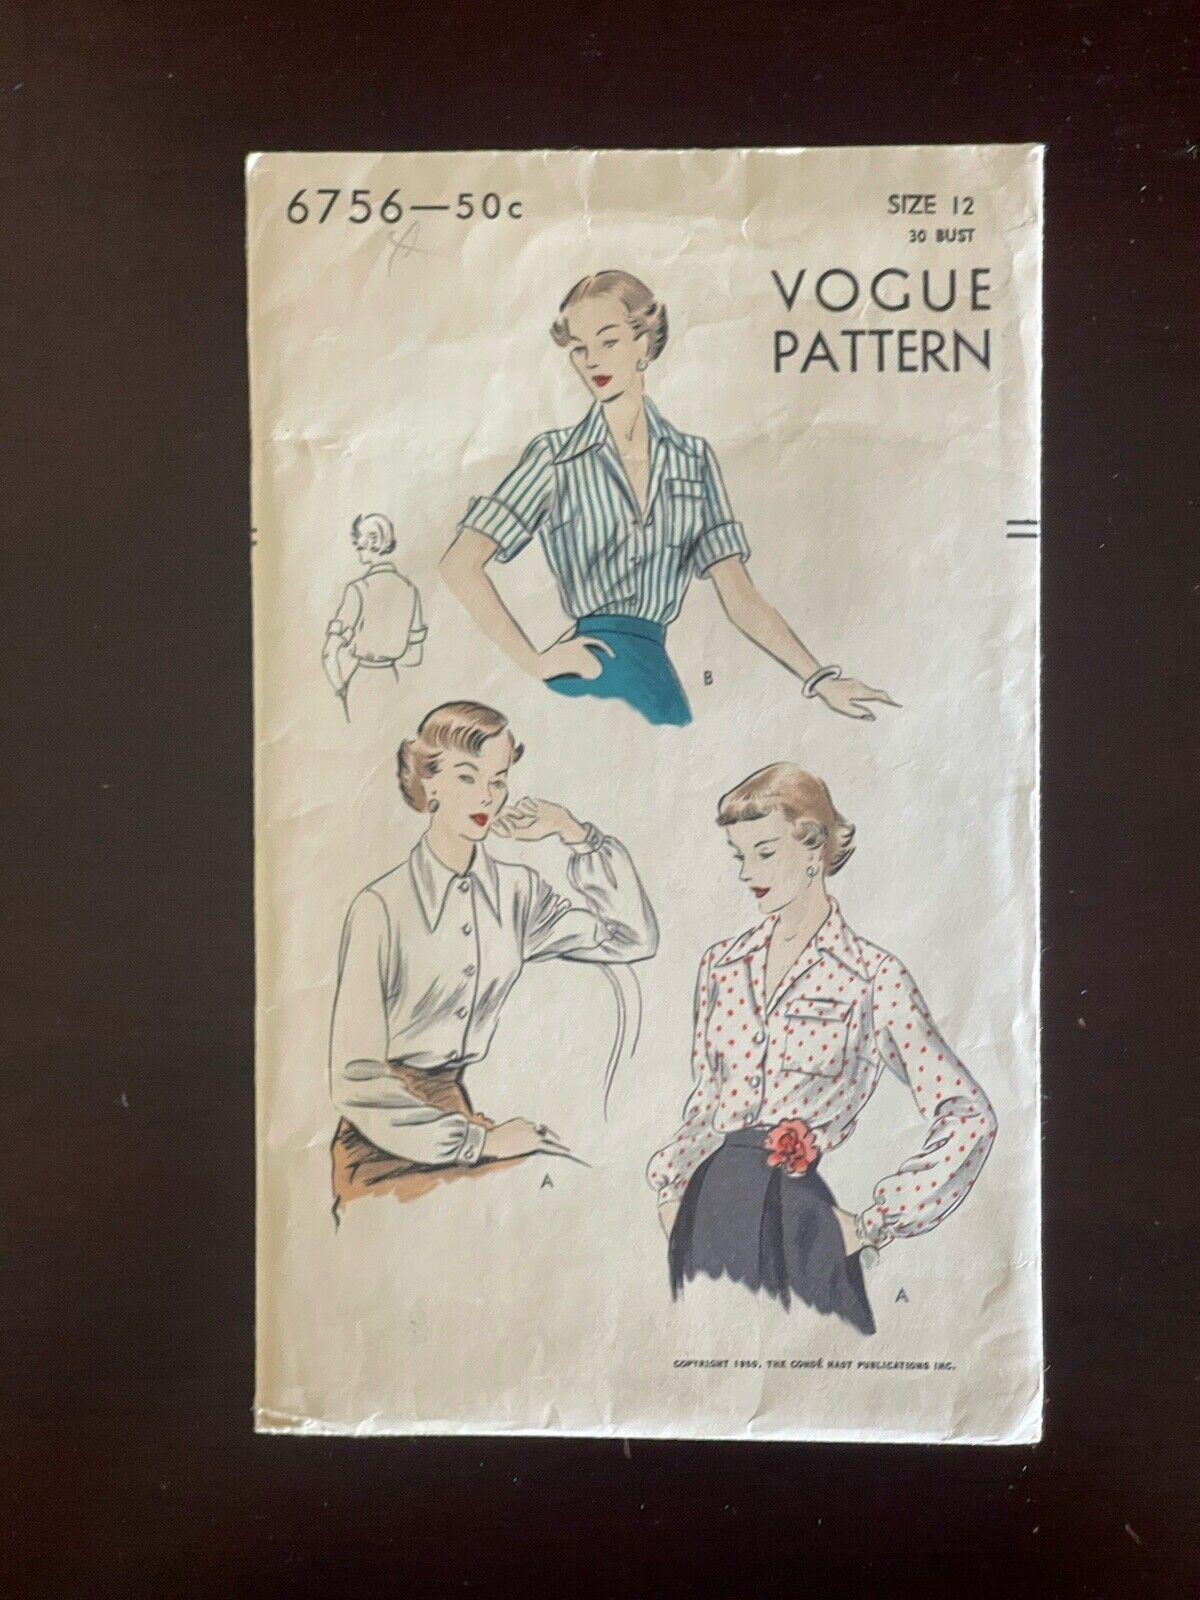 Vintage ORIGINAL 1950 VOGUE Women\'s Blouse Sewing Pattern Vogue 6756 IMMACULATE